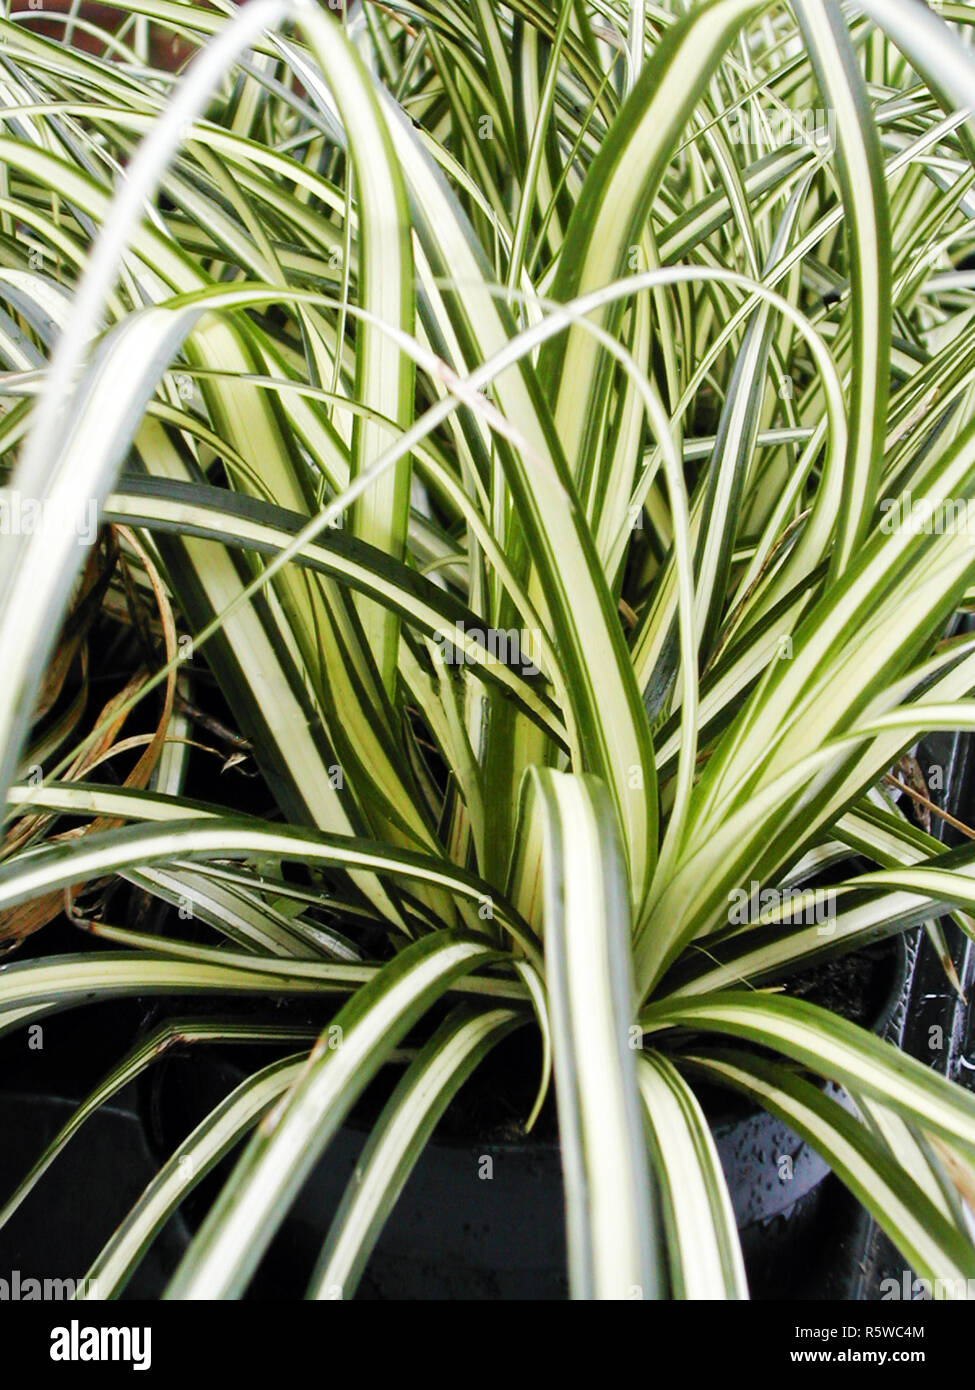 Ornamental Sedge Carex Evergold with green and creamy to yellow strap like leaves Stock Photo